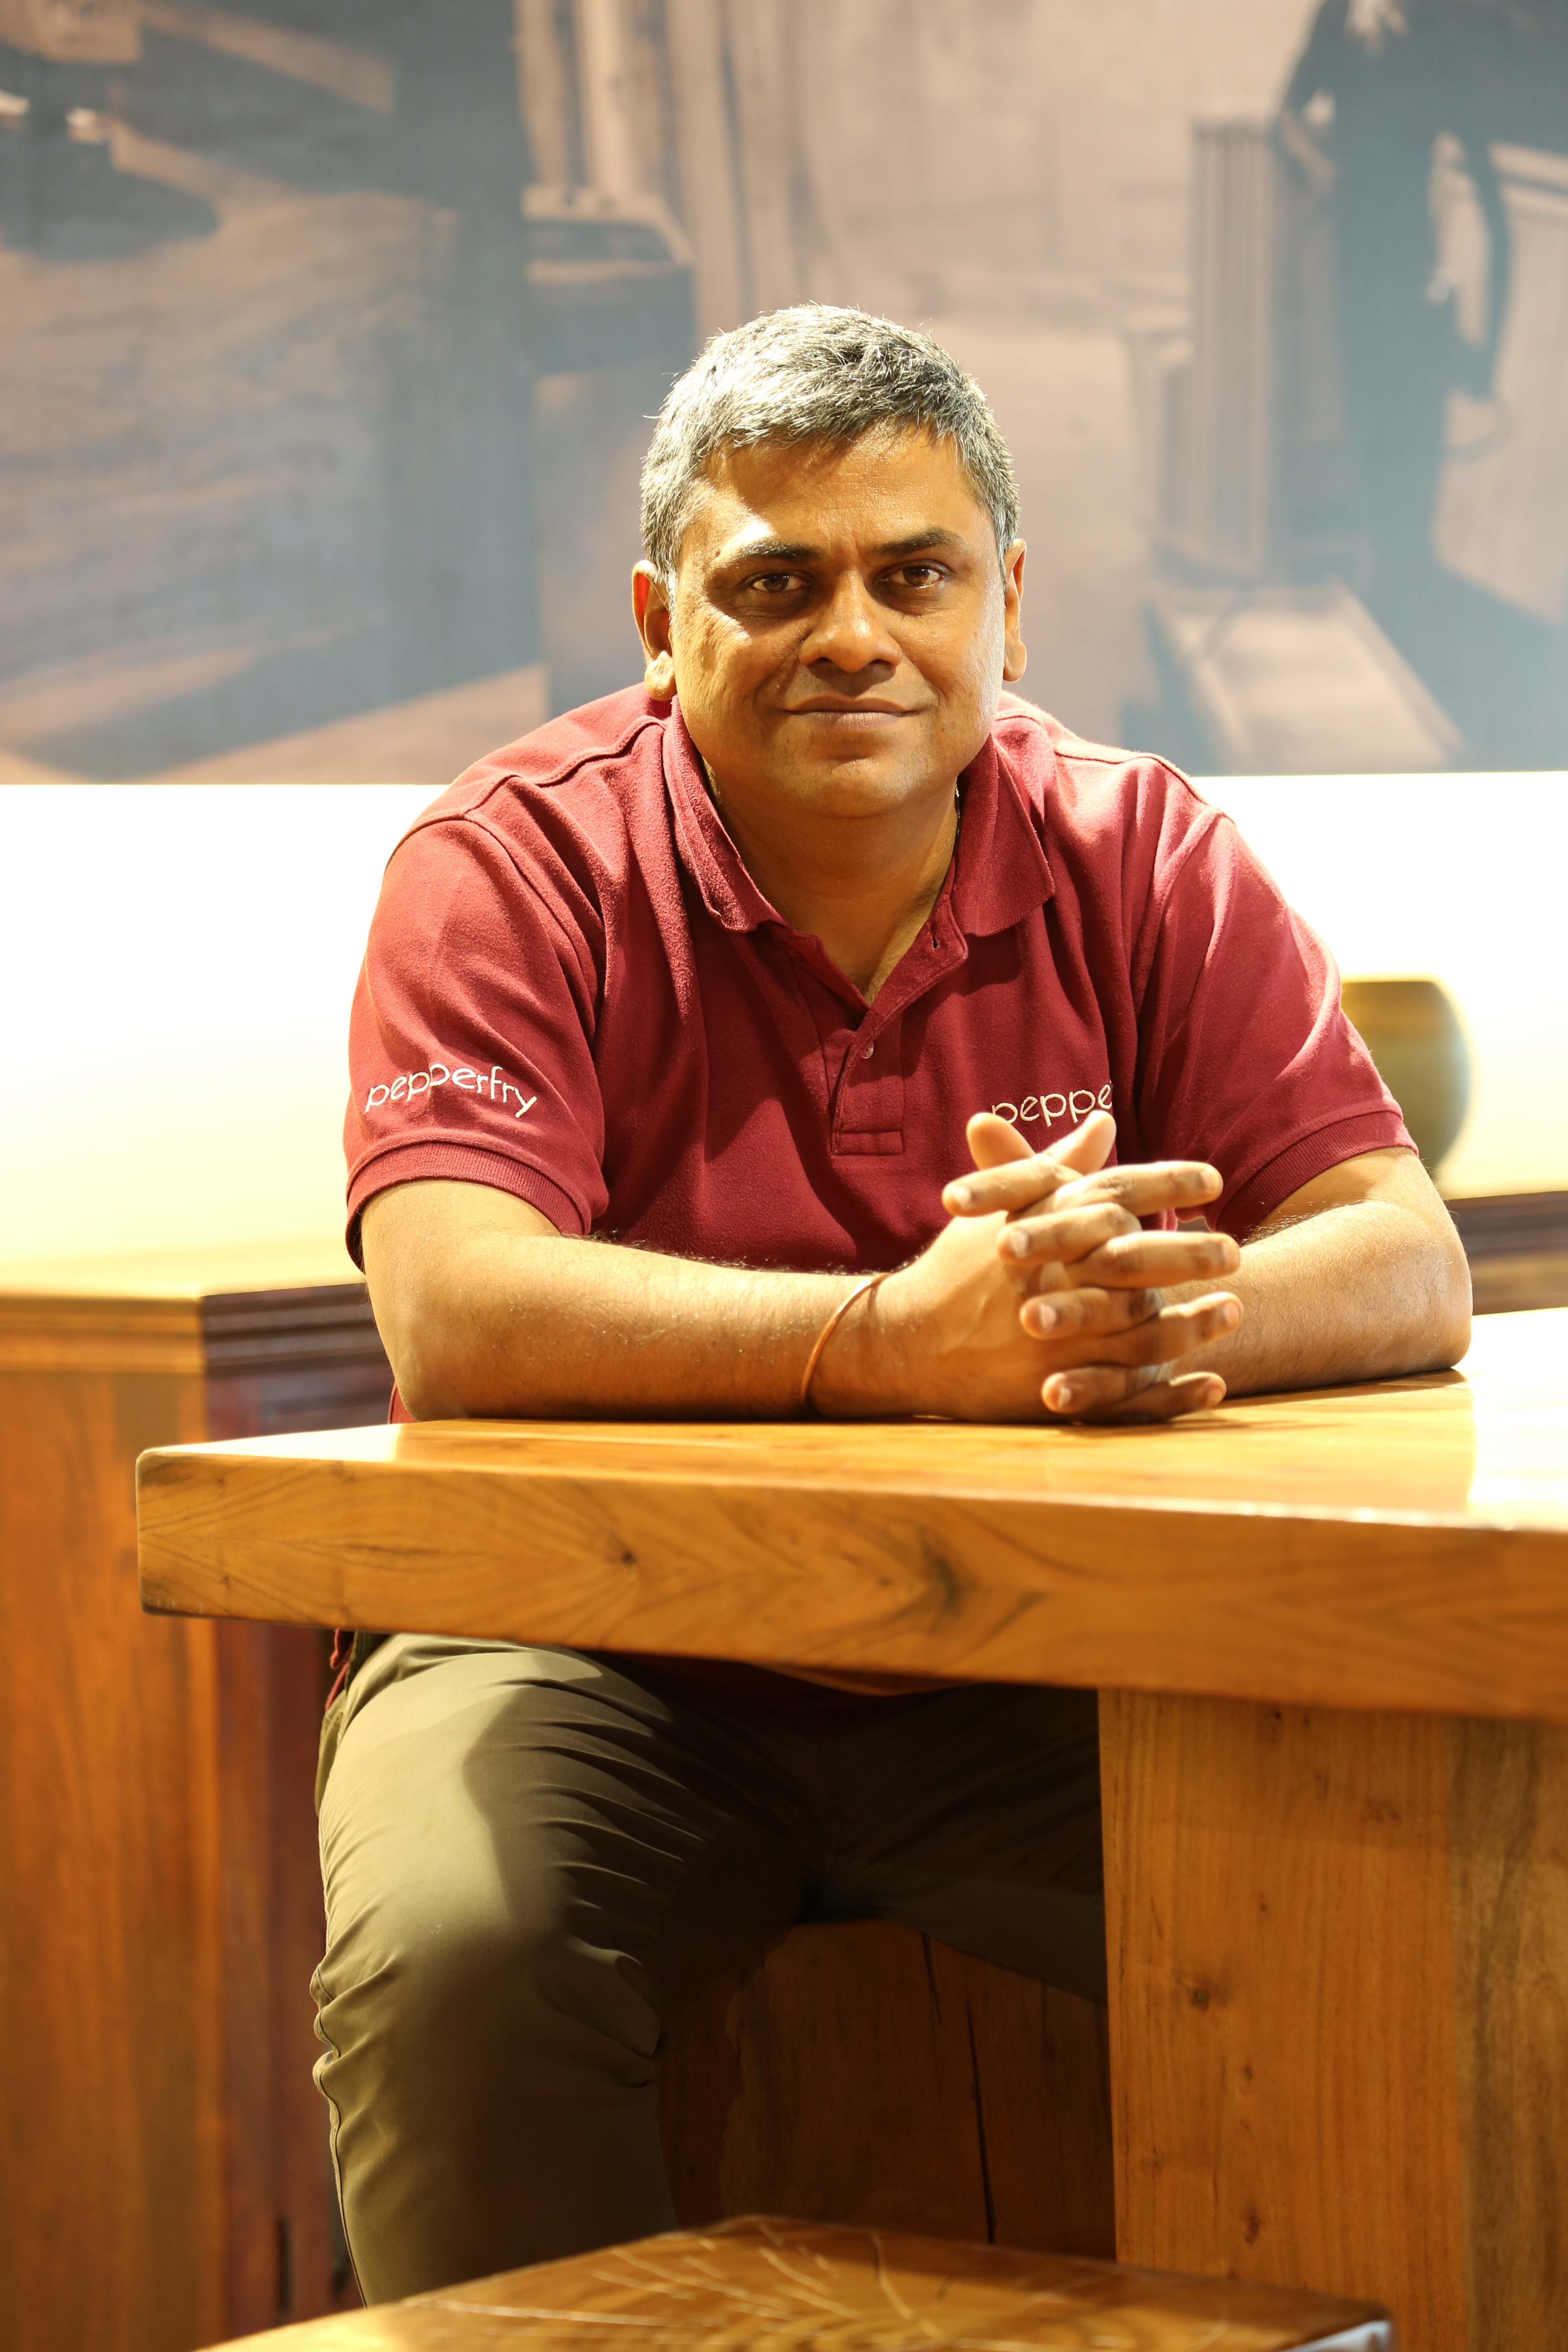 Ambareesh Murty, <span>Co-founder & CEO,   Pepperfry</span>